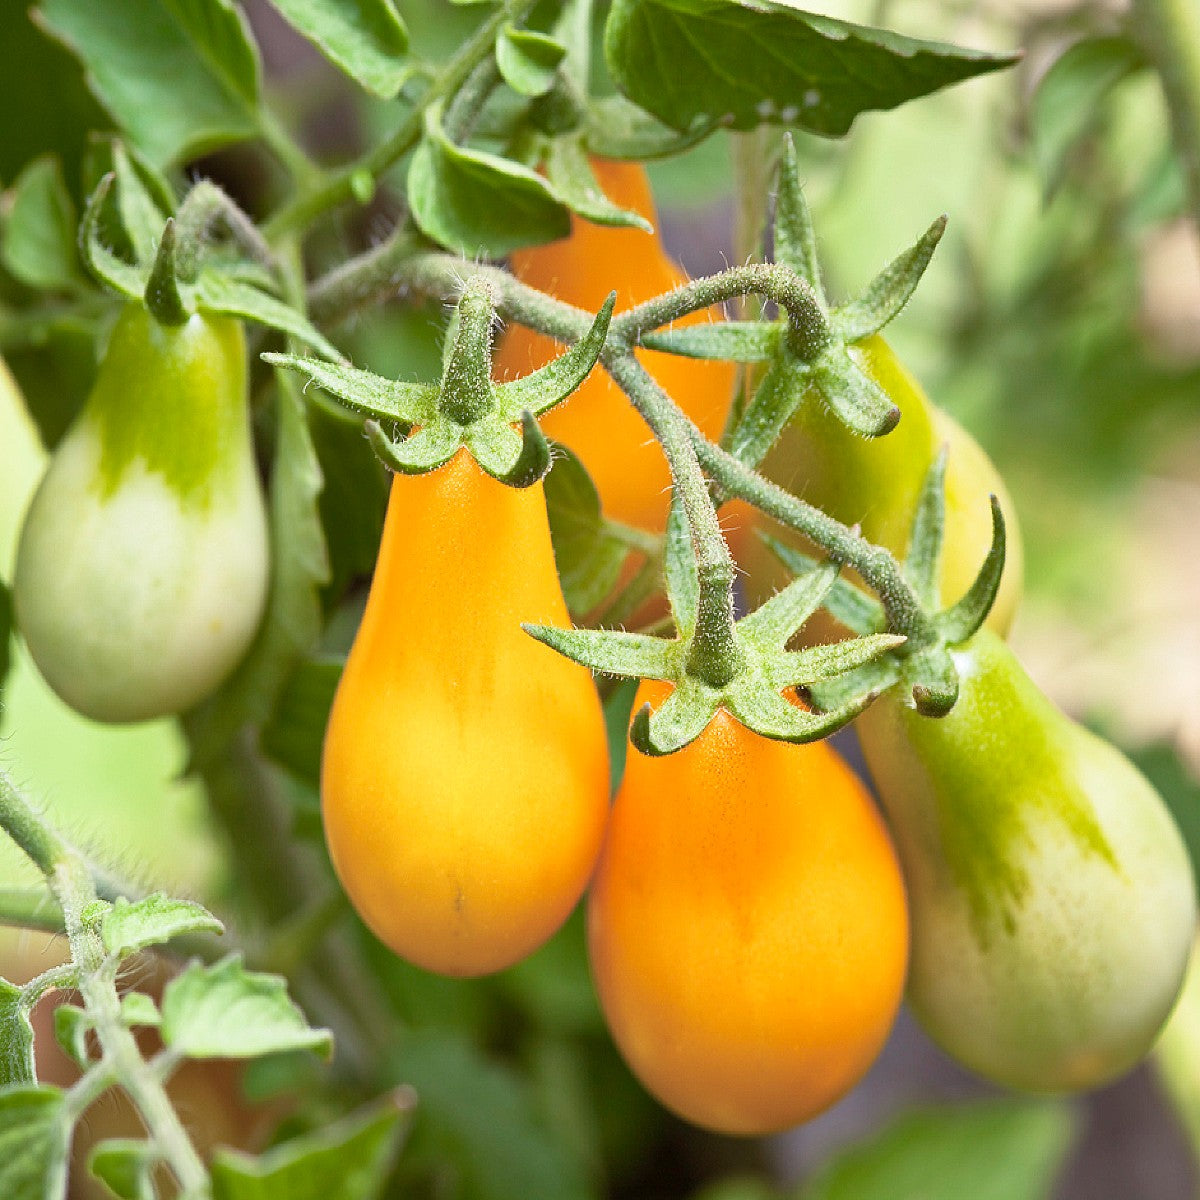 Yellow Brandywine Heirloom Tomatoes Information and Facts